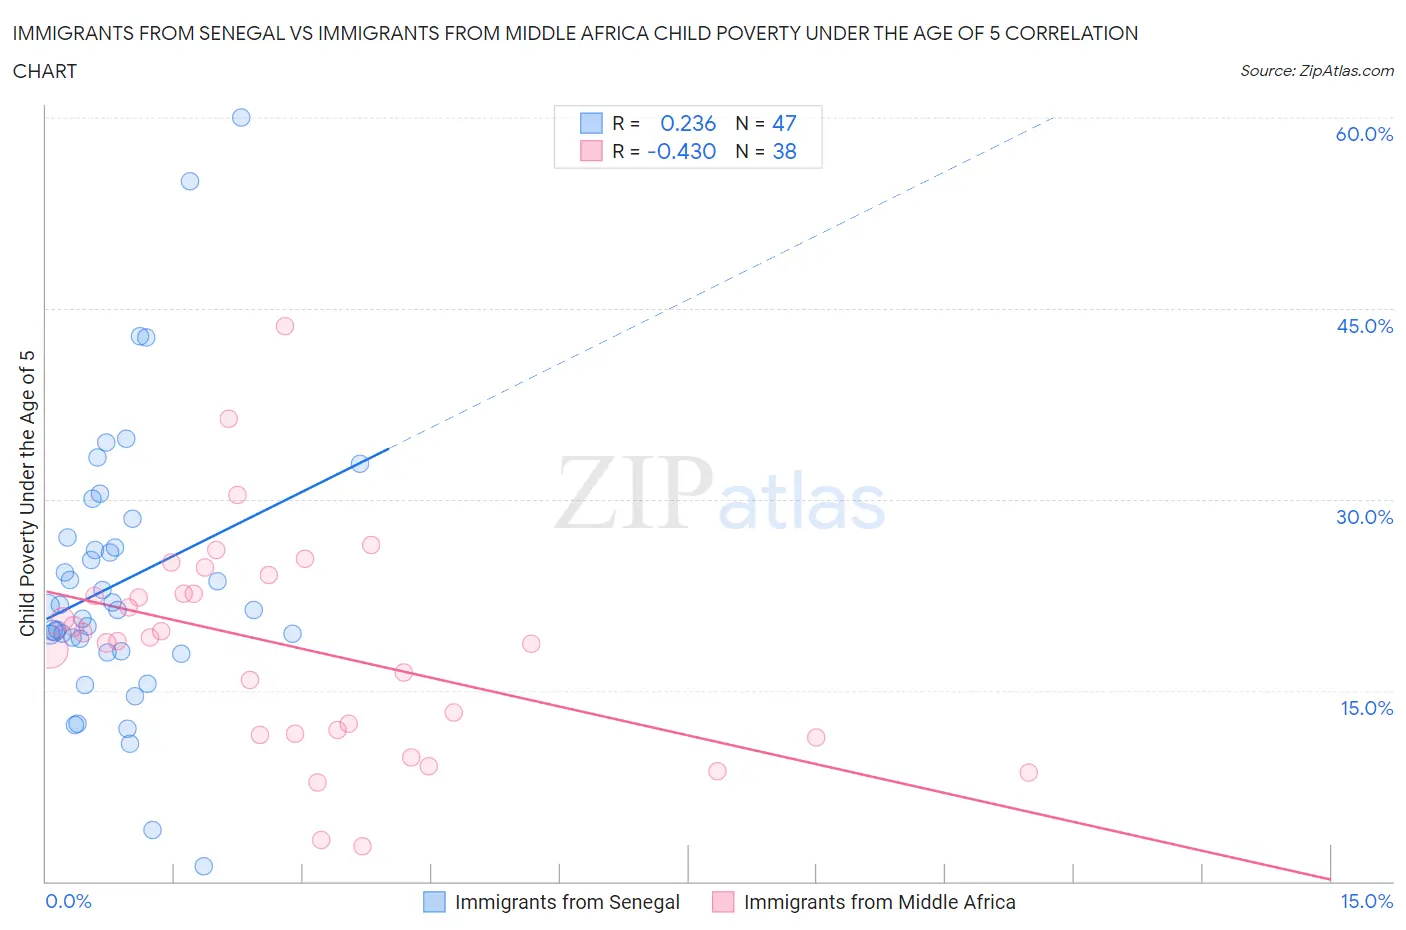 Immigrants from Senegal vs Immigrants from Middle Africa Child Poverty Under the Age of 5